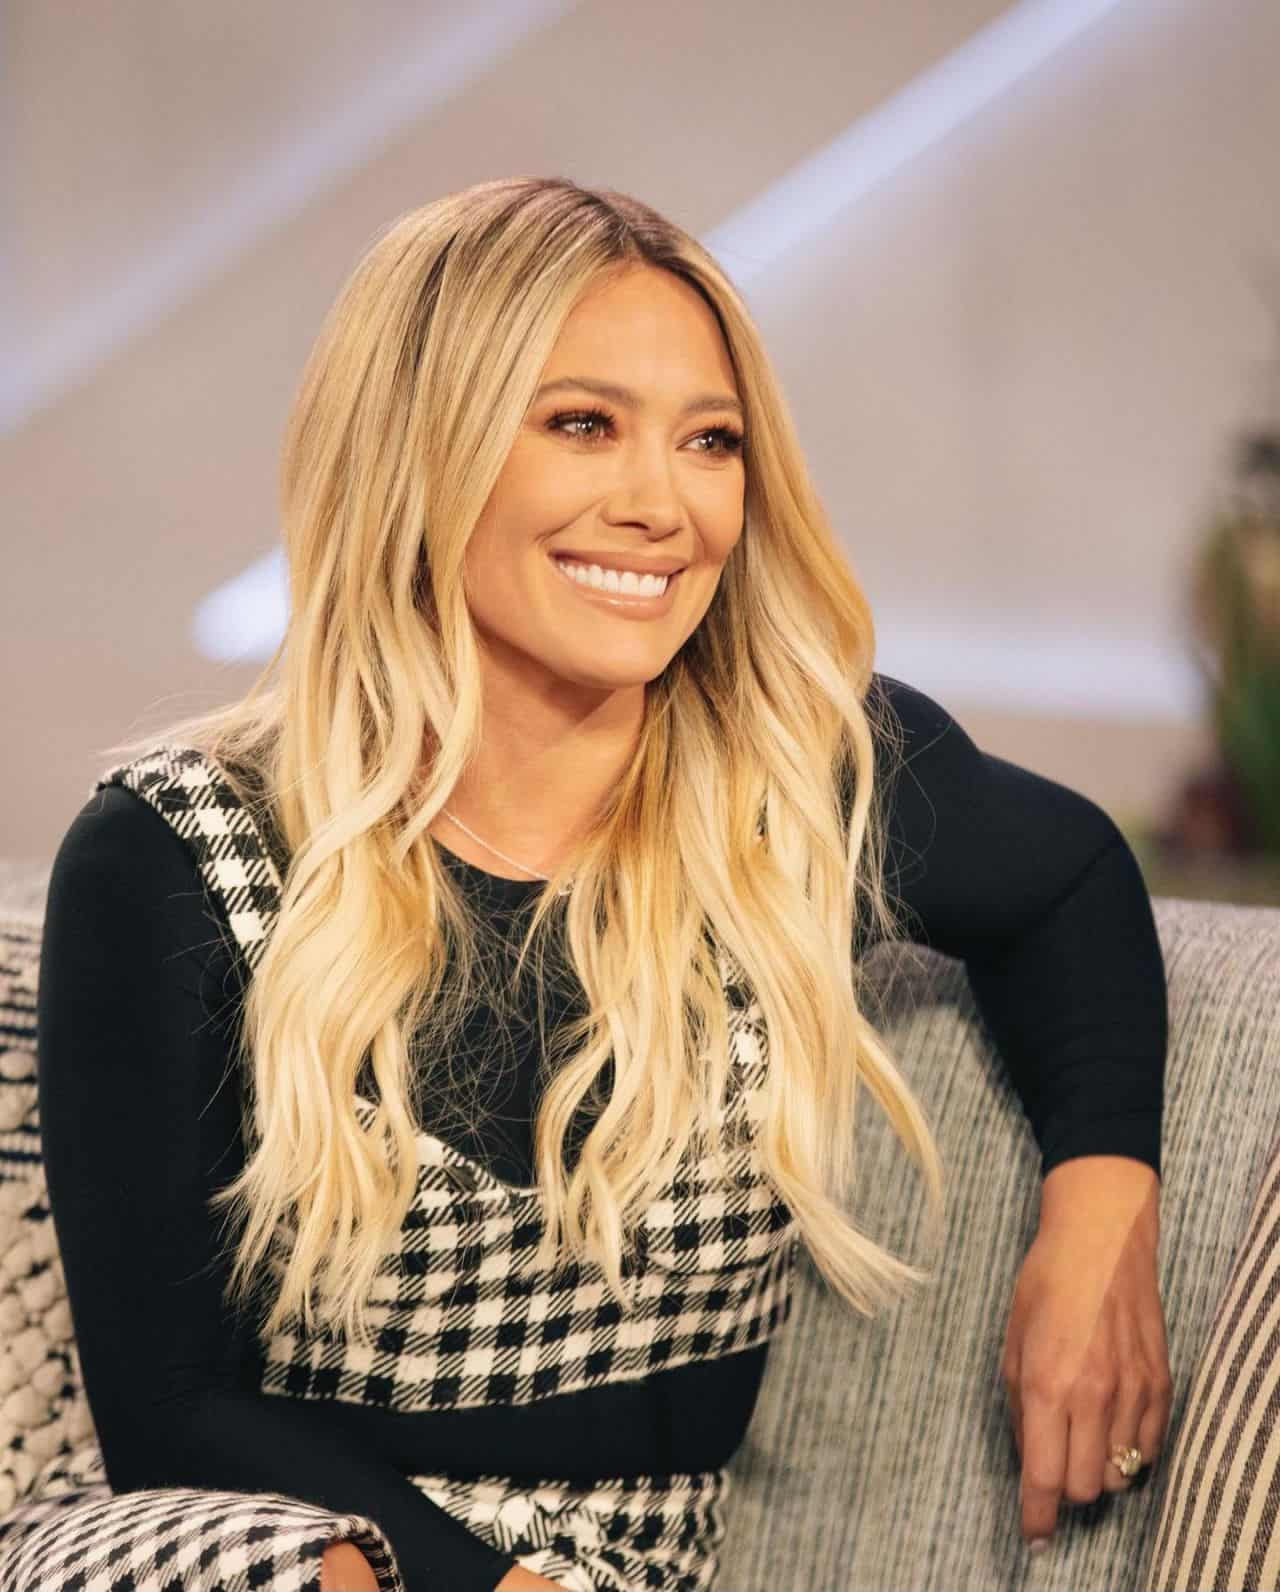 Hilary Duff Wowed Everyone with Her Wide Smile on The Kelly Clarkson Show